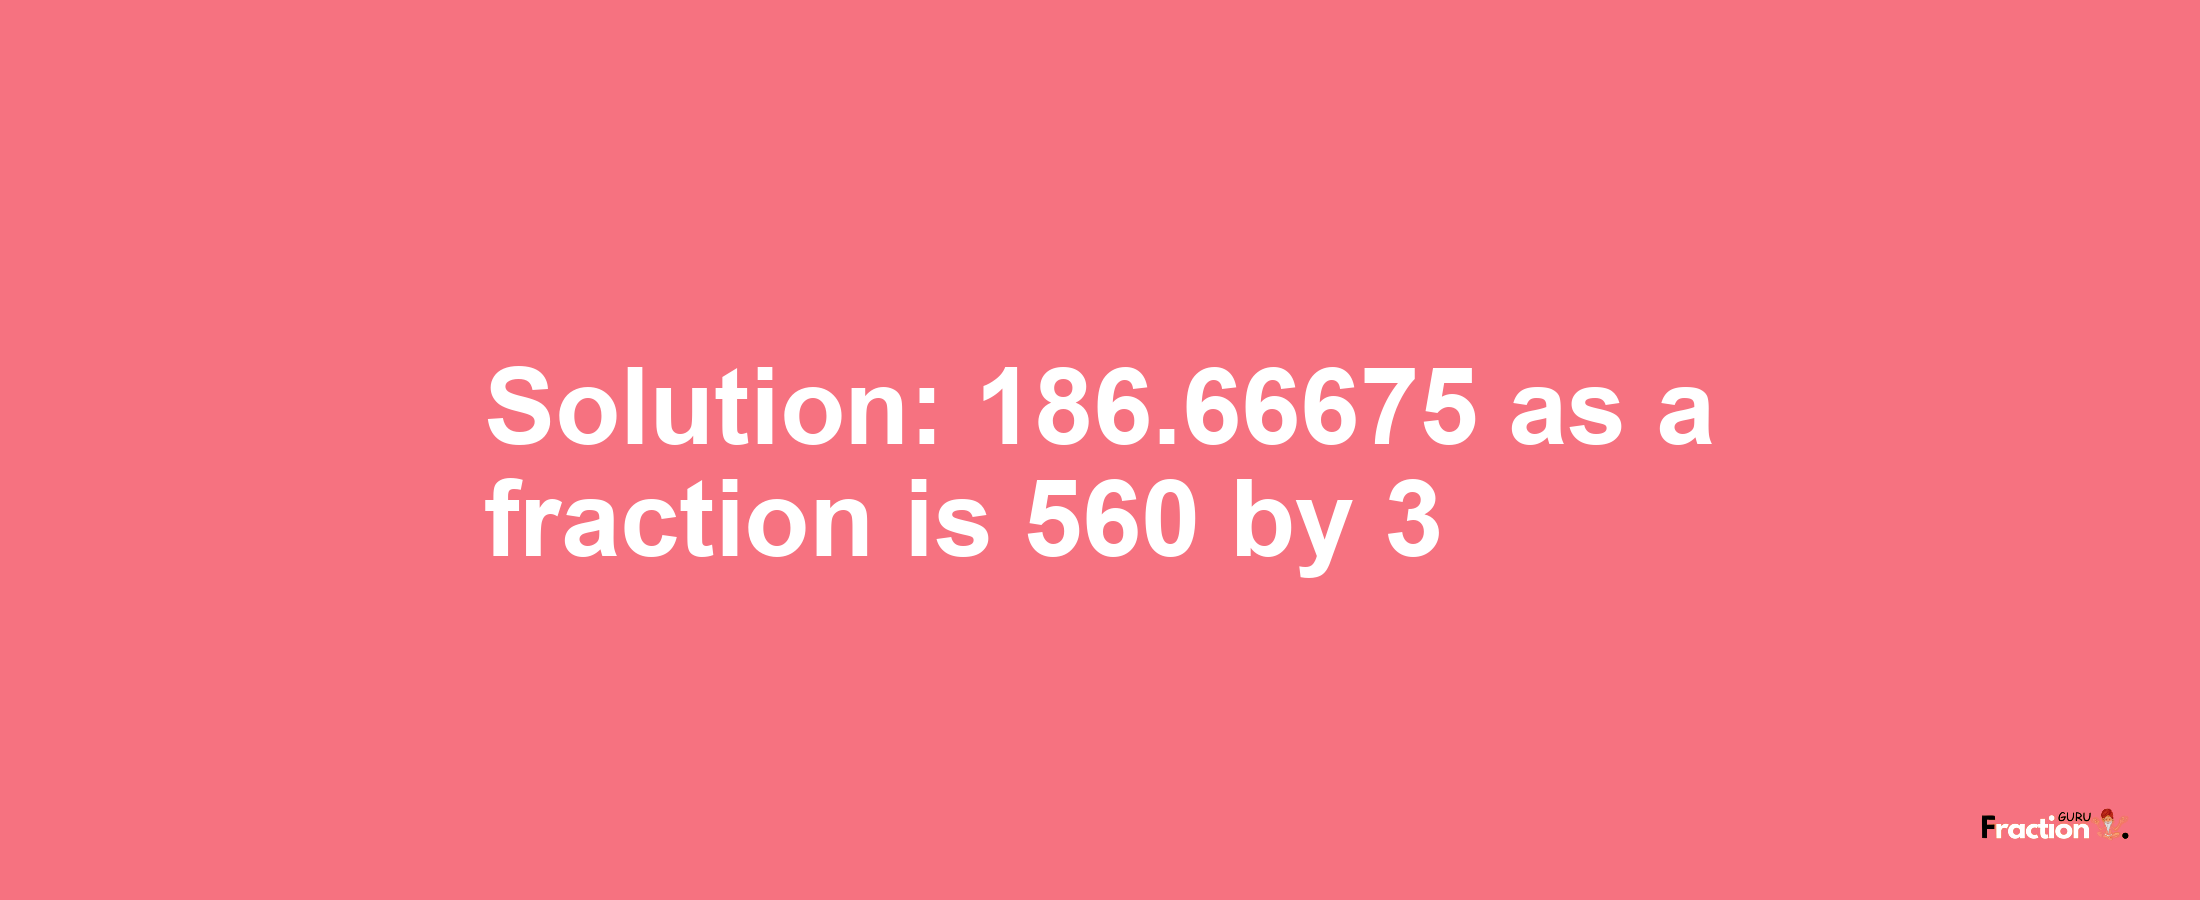 Solution:186.66675 as a fraction is 560/3